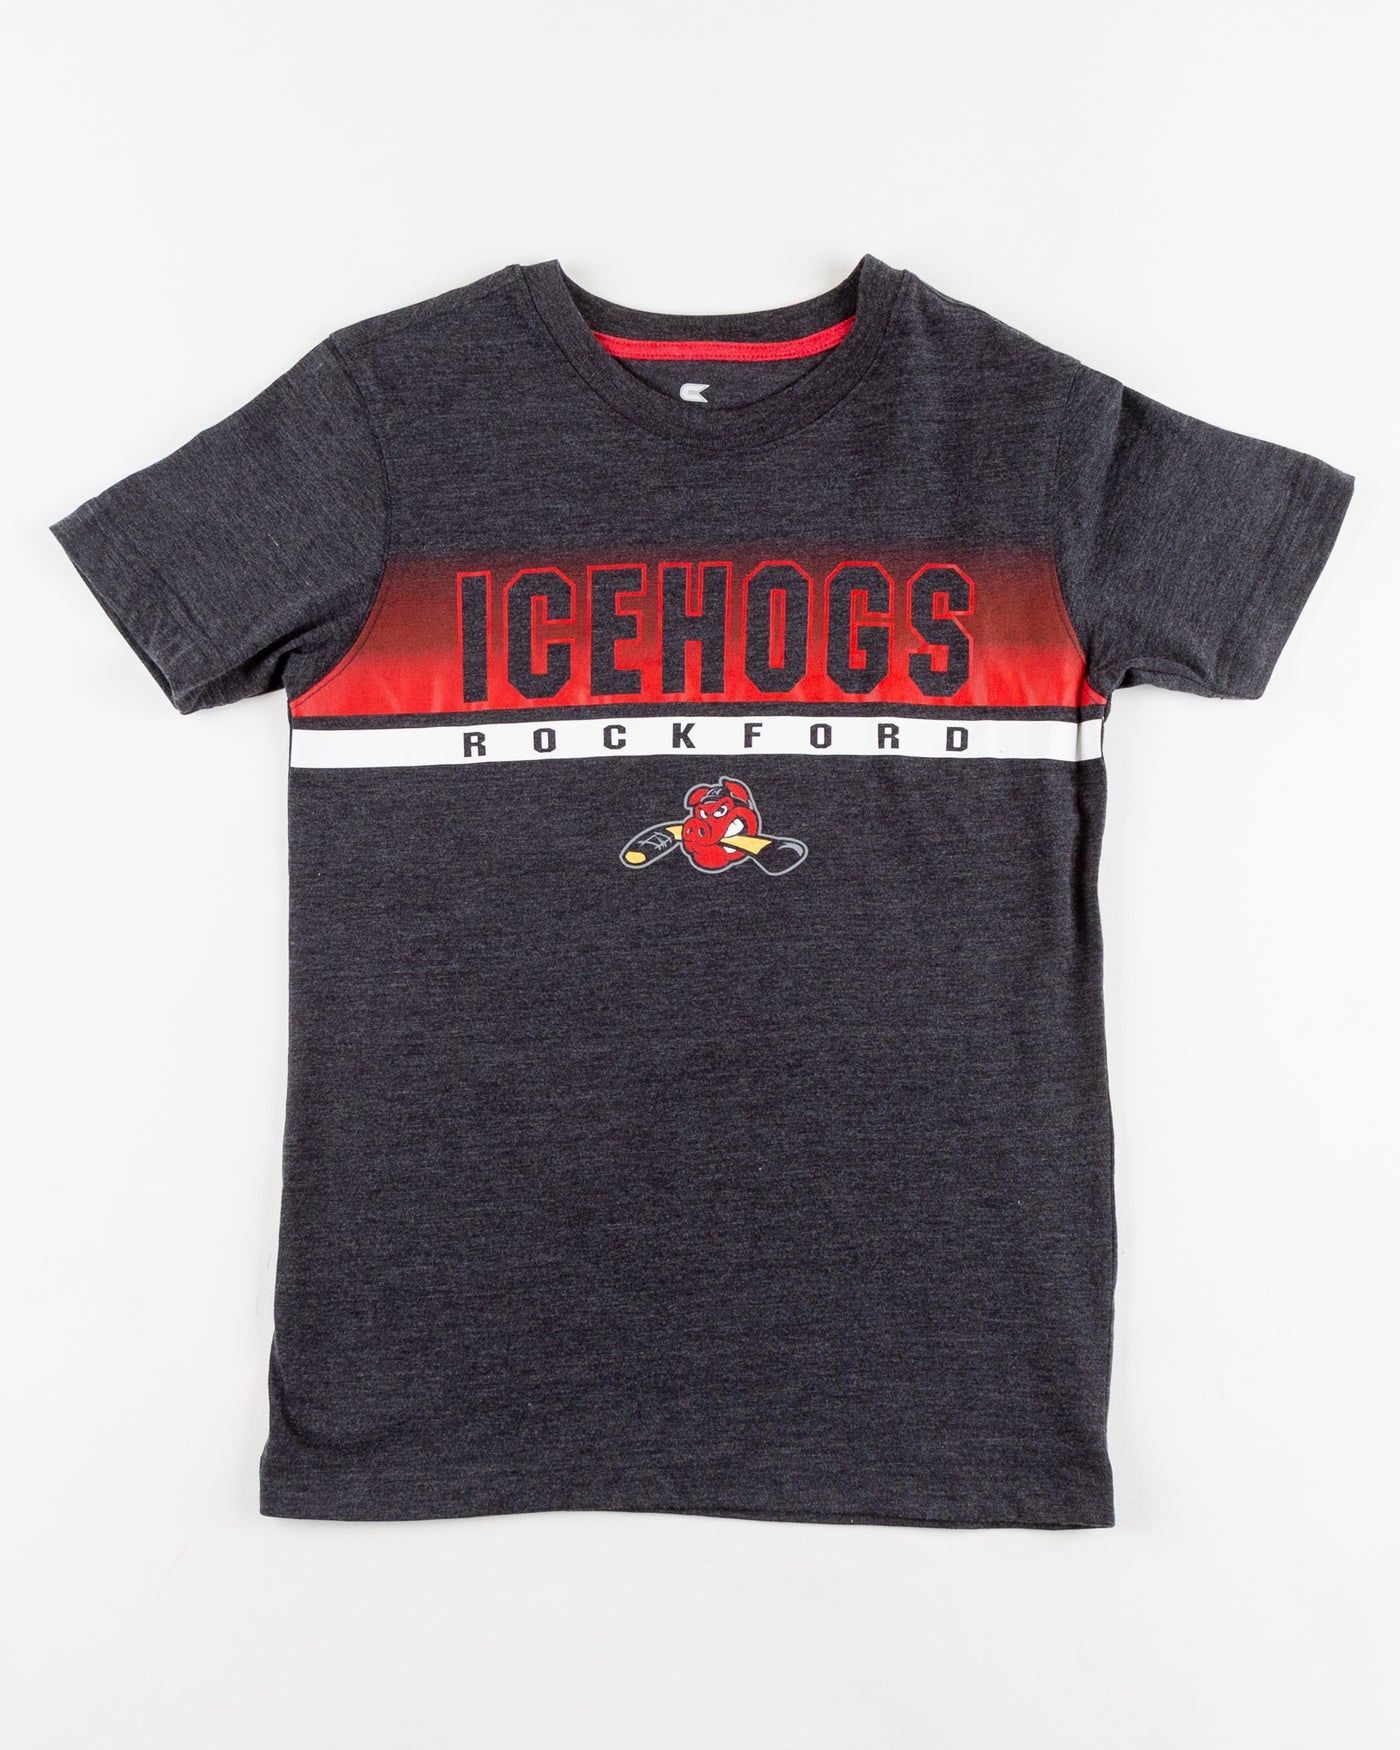 grey youth Colosseum t-shirt with Rockford IceHogs graphic across chest - front lay flat